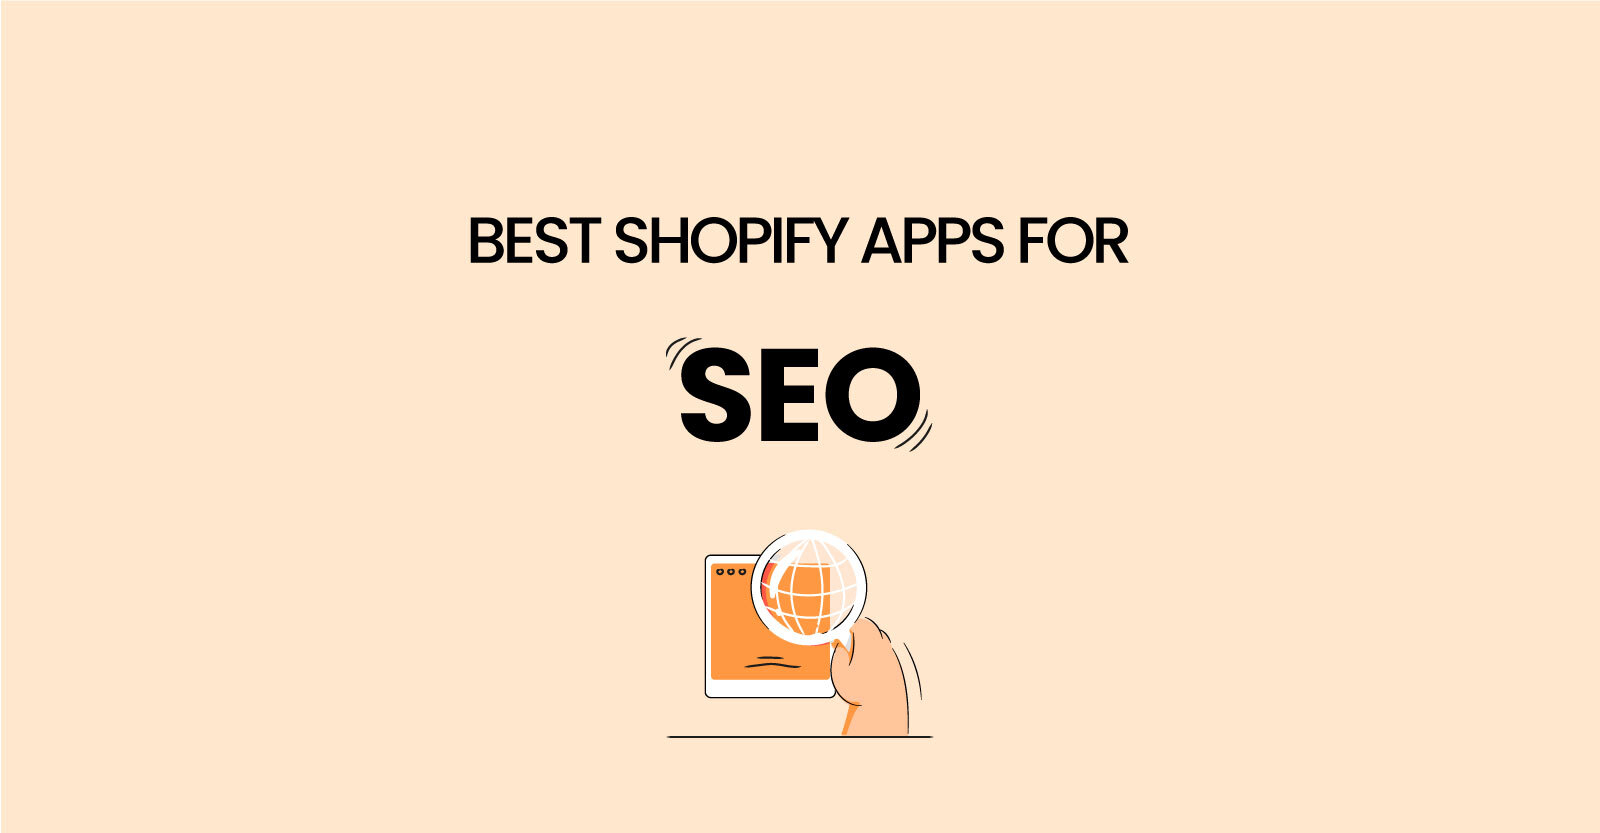 Best SEO Apps for Shopify to Rank High